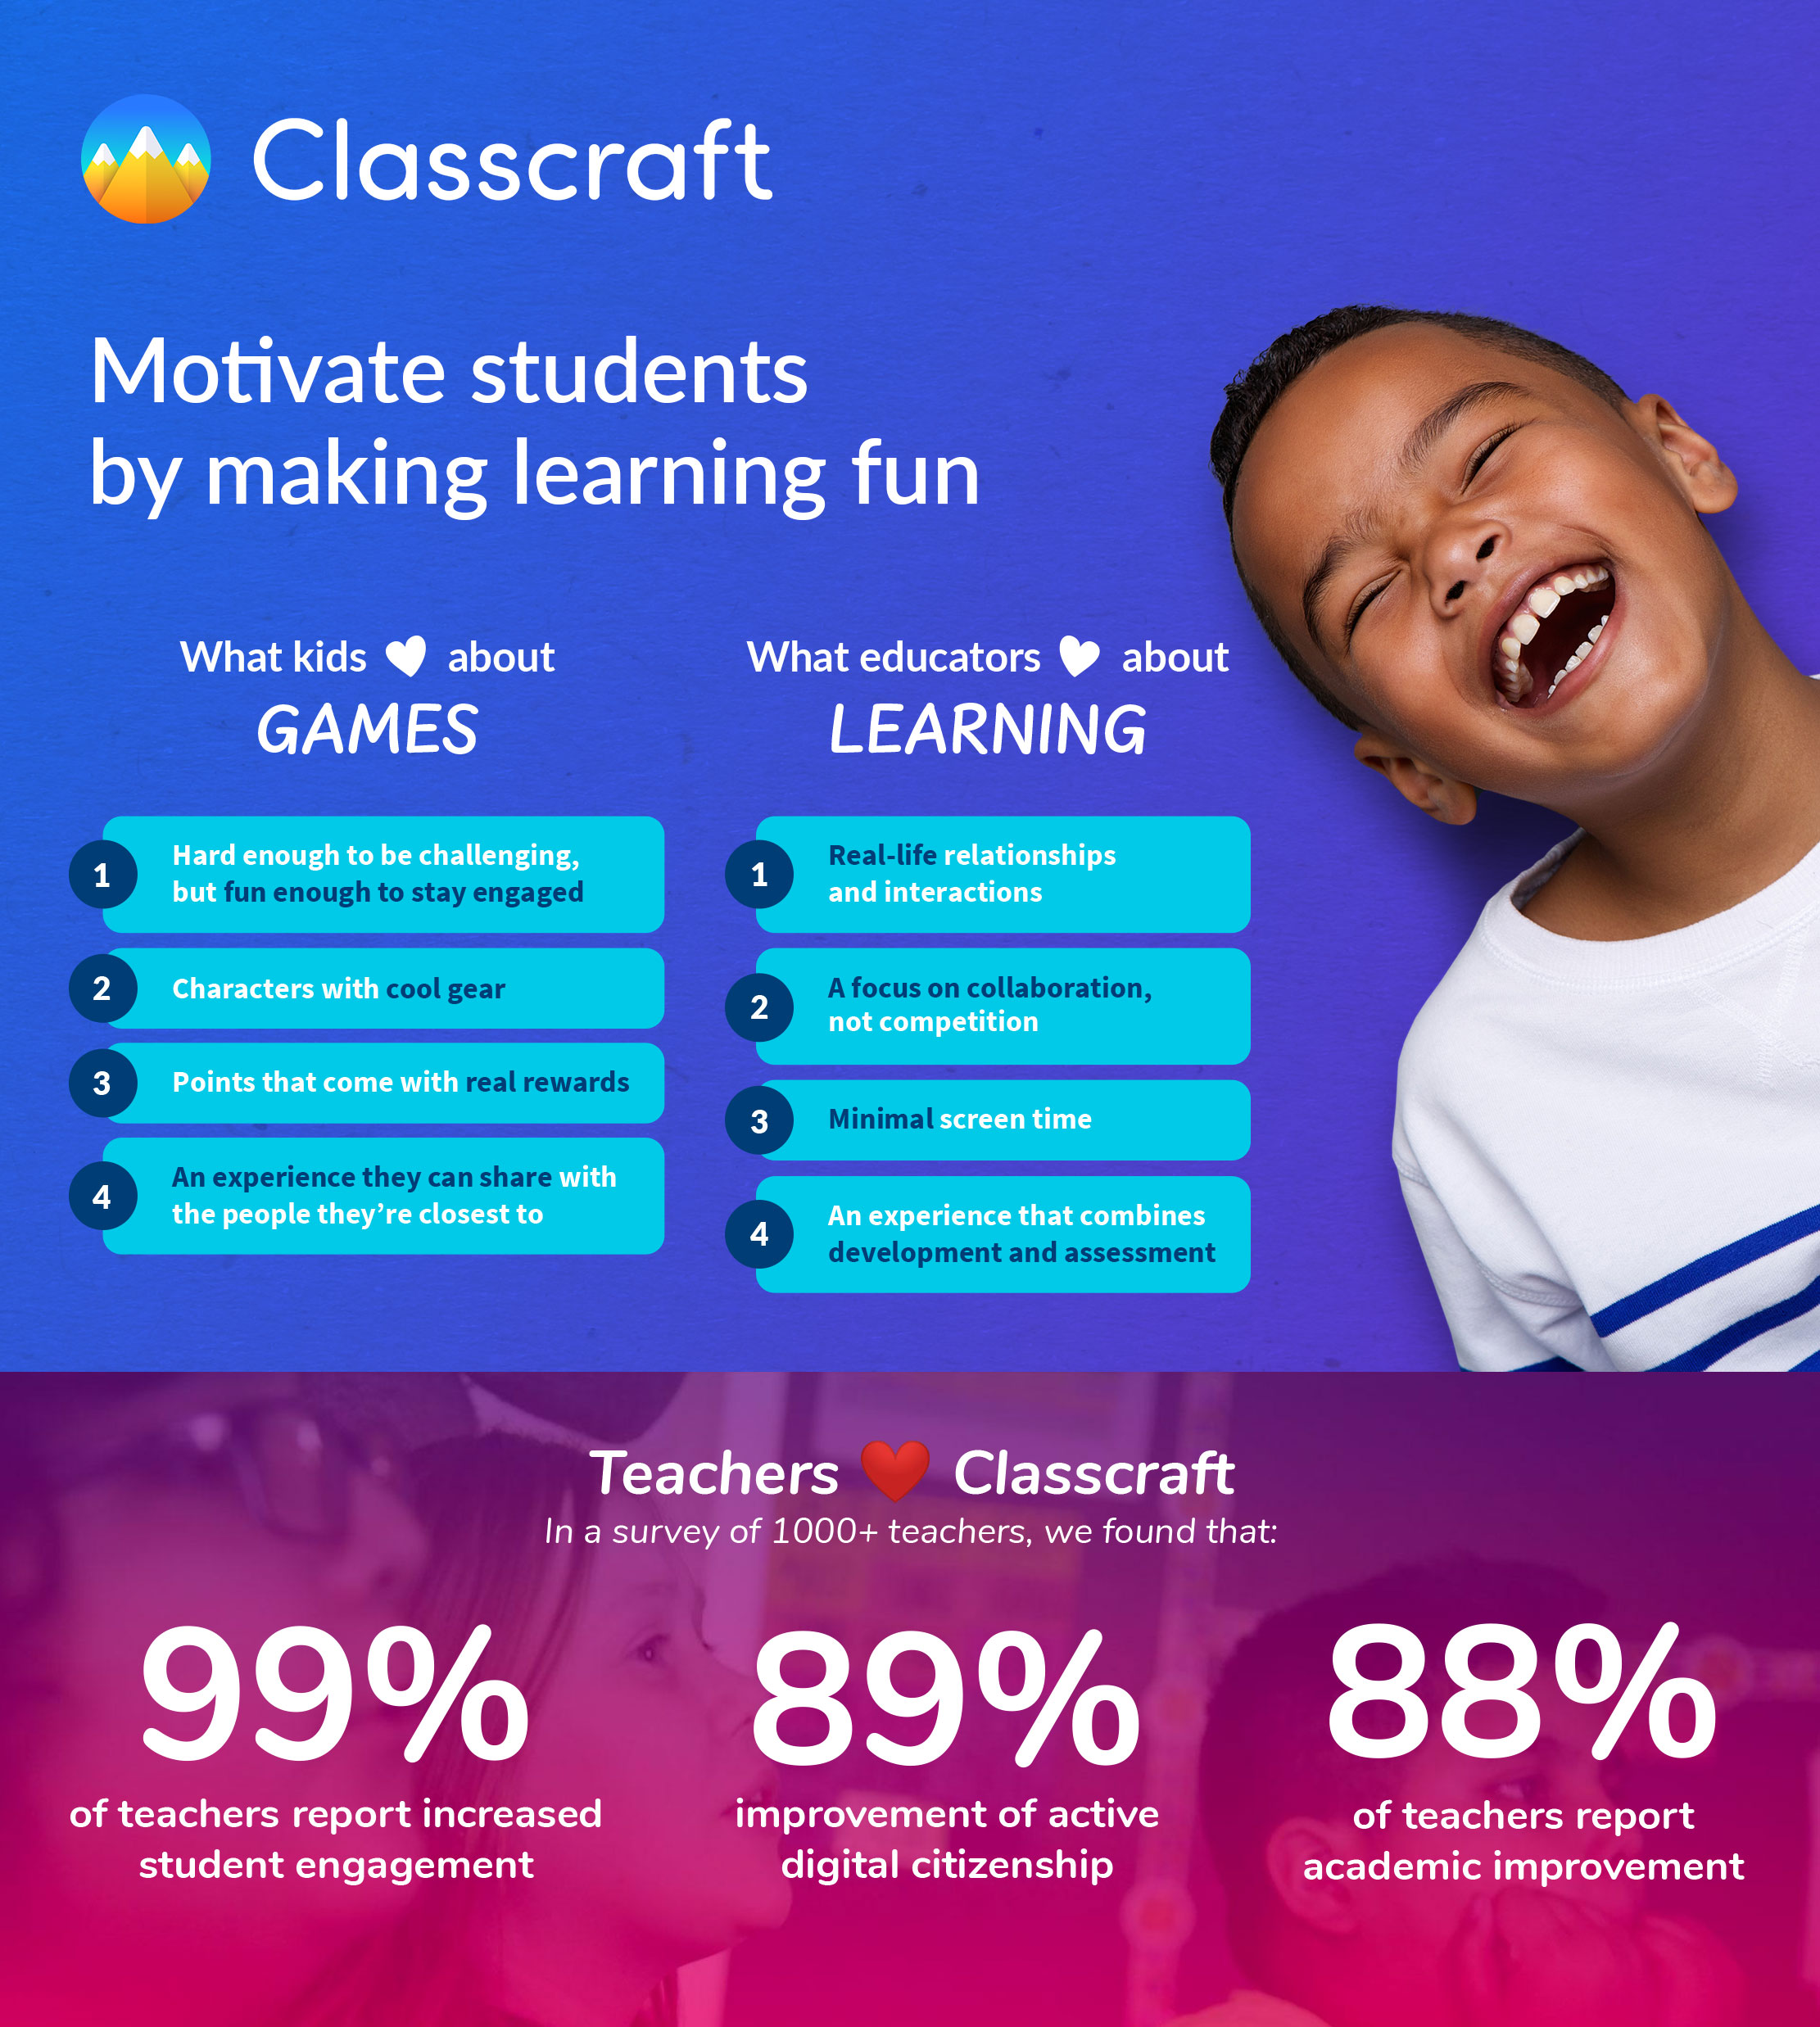 Classcraft combines time-tested pedagogy with a modern approach, harnessing the power of games to foster connections that make learning more meaningful. 